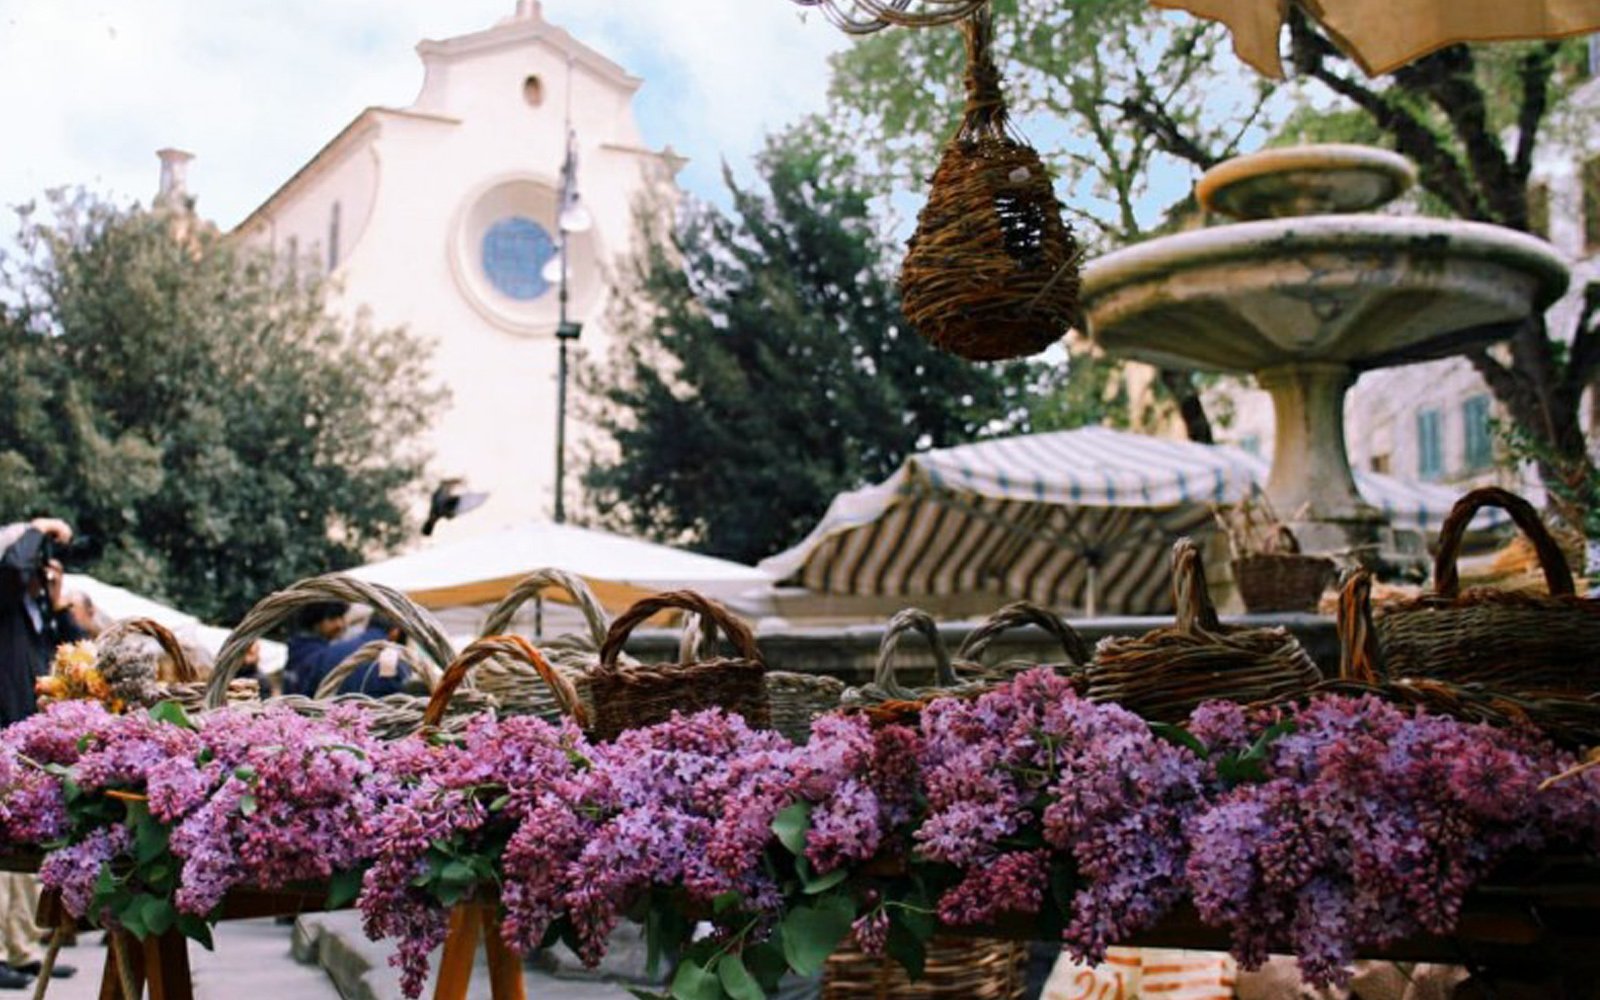 Fairs and markets in the Oltrarno